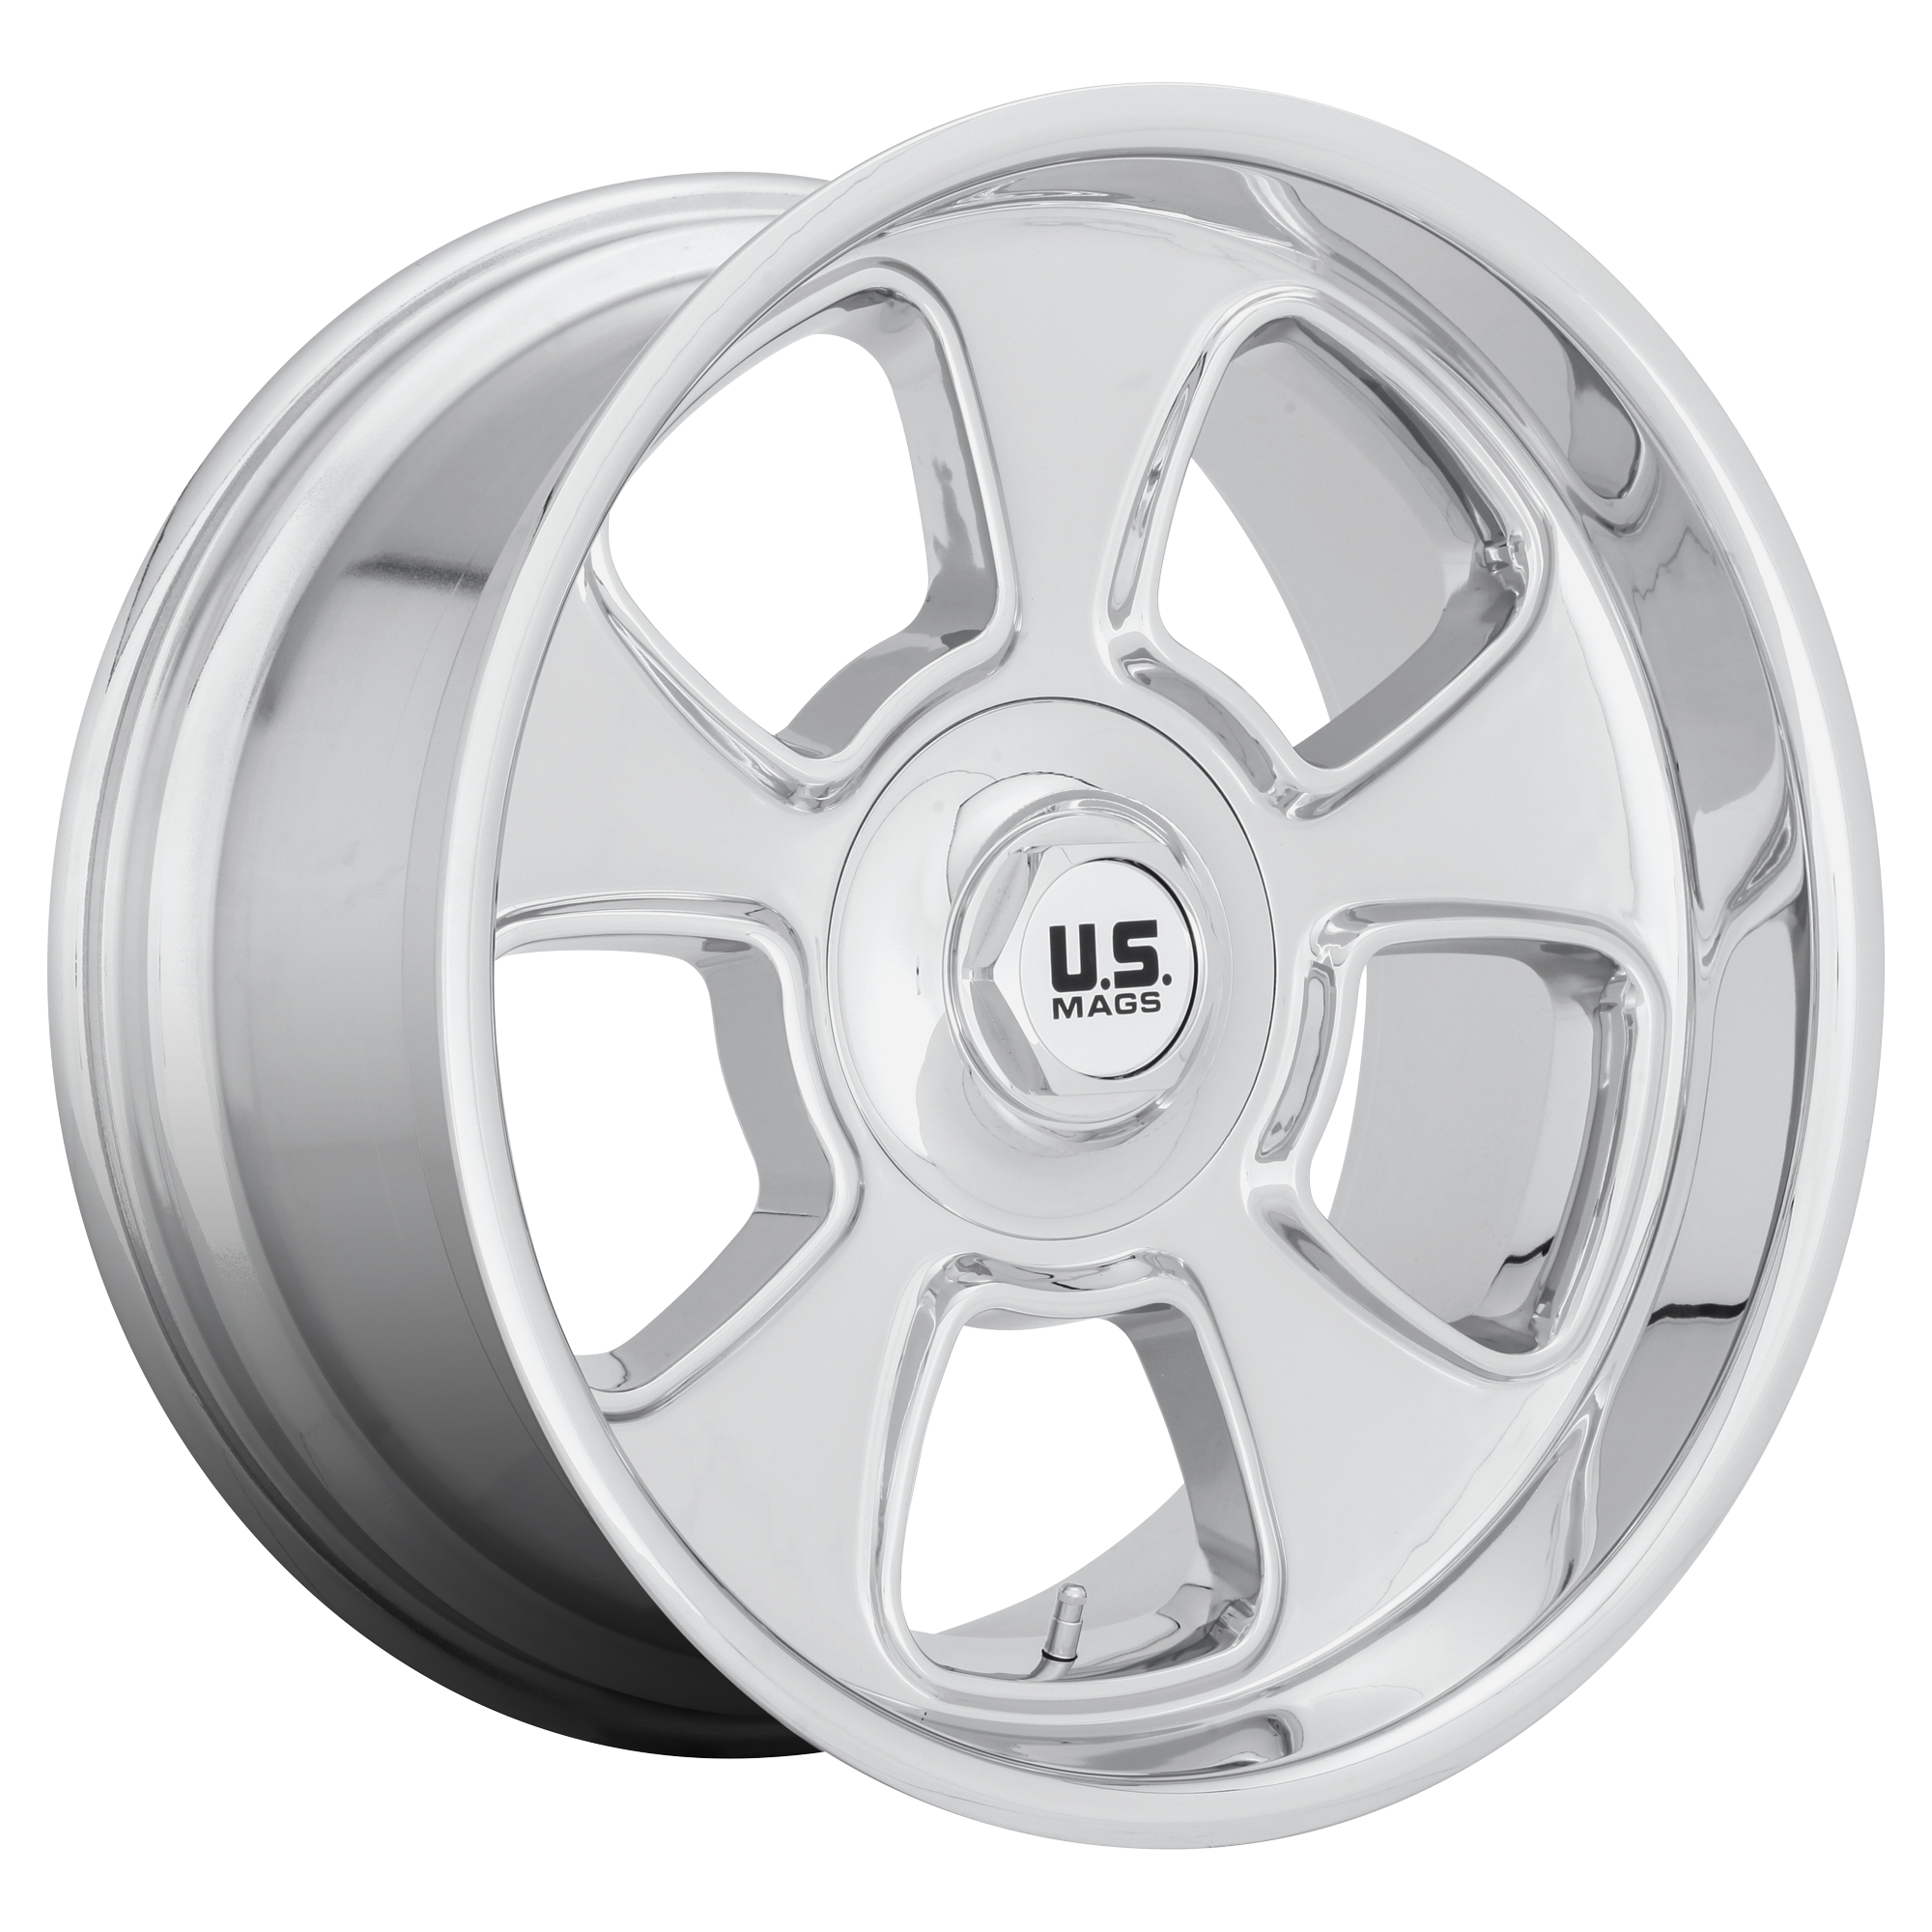 BOULEVARD 20x9.5 5x127.00/5x139.70 CHROME PLATED (1 mm) - Tires and Engine Performance